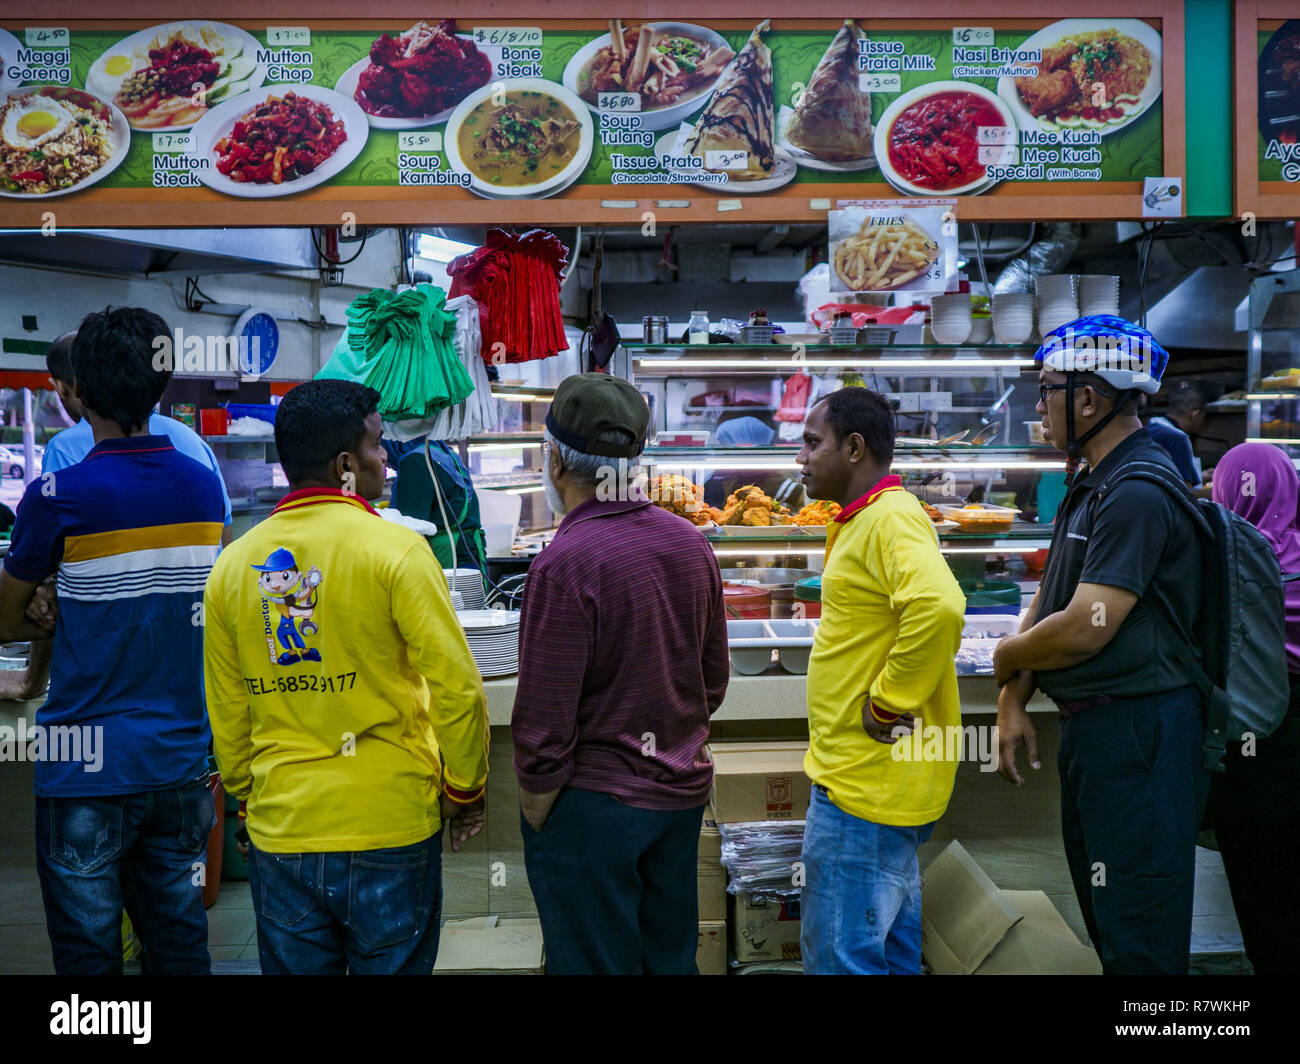 Singapore, Singapore. 11th Dec, 2018. People lined up a food shop in a ''hawker court'' in the Geylang neighborhood. Singapore forced food venders off the street and put them in hawker courts years ago. The Geylang area of Singapore, between the Central Business District and Changi Airport, was originally coconut plantations and Malay villages. During Singapore's boom the coconut plantations and other farms were pushed out and now the area is a working class community of Malay, Indian and Chinese people. In the 2000s, developers started gentrifying Geylang and new housing estate developme Stock Photo